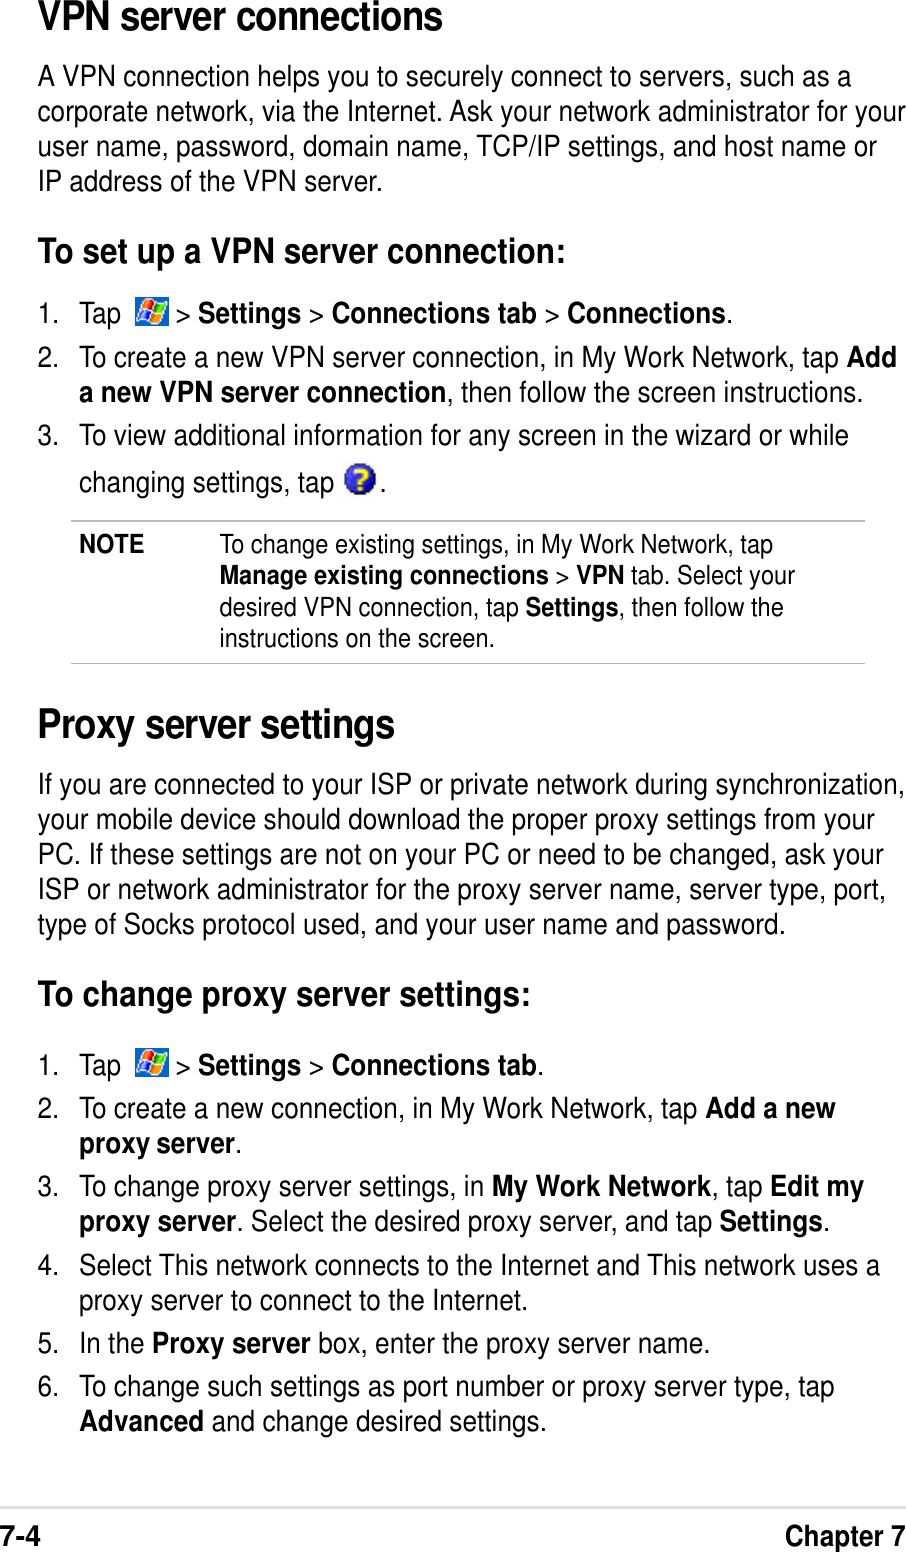 7-4Chapter 7VPN server connectionsA VPN connection helps you to securely connect to servers, such as acorporate network, via the Internet. Ask your network administrator for youruser name, password, domain name, TCP/IP settings, and host name orIP address of the VPN server.To set up a VPN server connection:1. Tap    &gt; Settings &gt;Connections tab &gt;Connections.2. To create a new VPN server connection, in My Work Network, tap Adda new VPN server connection, then follow the screen instructions.3. To view additional information for any screen in the wizard or whilechanging settings, tap  .NOTE To change existing settings, in My Work Network, tapManage existing connections &gt; VPN tab. Select yourdesired VPN connection, tap Settings, then follow theinstructions on the screen.Proxy server settingsIf you are connected to your ISP or private network during synchronization,your mobile device should download the proper proxy settings from yourPC. If these settings are not on your PC or need to be changed, ask yourISP or network administrator for the proxy server name, server type, port,type of Socks protocol used, and your user name and password.To change proxy server settings:1. Tap    &gt; Settings &gt;Connections tab.2. To create a new connection, in My Work Network, tap Add a newproxy server.3. To change proxy server settings, in My Work Network, tap Edit myproxy server. Select the desired proxy server, and tap Settings.4. Select This network connects to the Internet and This network uses aproxy server to connect to the Internet.5. In the Proxy server box, enter the proxy server name.6. To change such settings as port number or proxy server type, tapAdvanced and change desired settings.